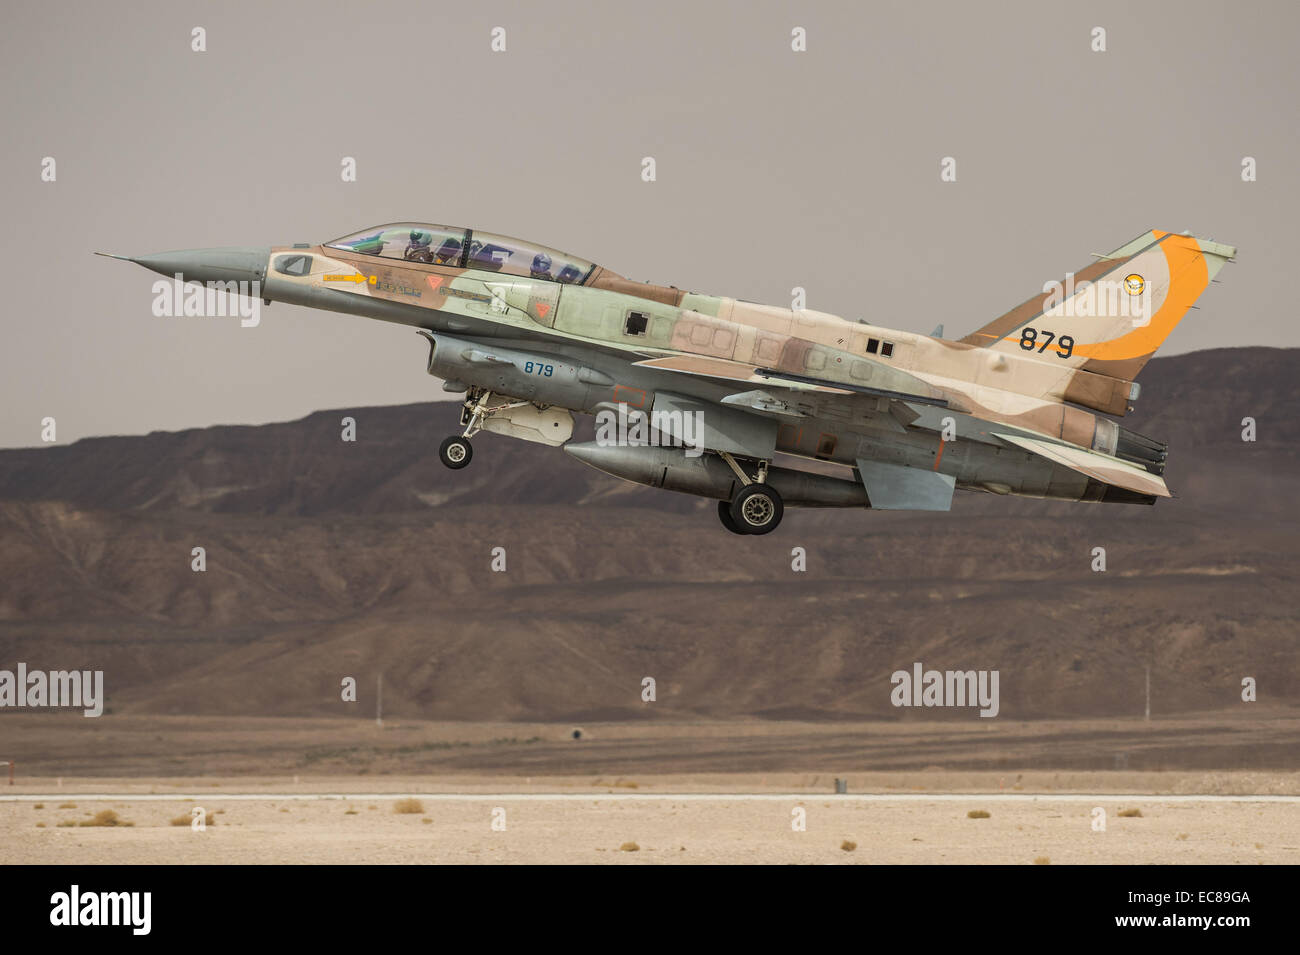 Uvda Airbase, Israel. 9th Dec, 2014. An Israeli F-16 jet takes off during a joint air forces drill at the Uvda airbase in the Negev Desert near Eilat, southern Israel, on Dec. 9, 2014. Israel and Greece concluded a Joint Air Forces drill during the joint IDF-Hellenic Air Force drill week. Credit:  Li Rui/Xinhua/Alamy Live News Stock Photo